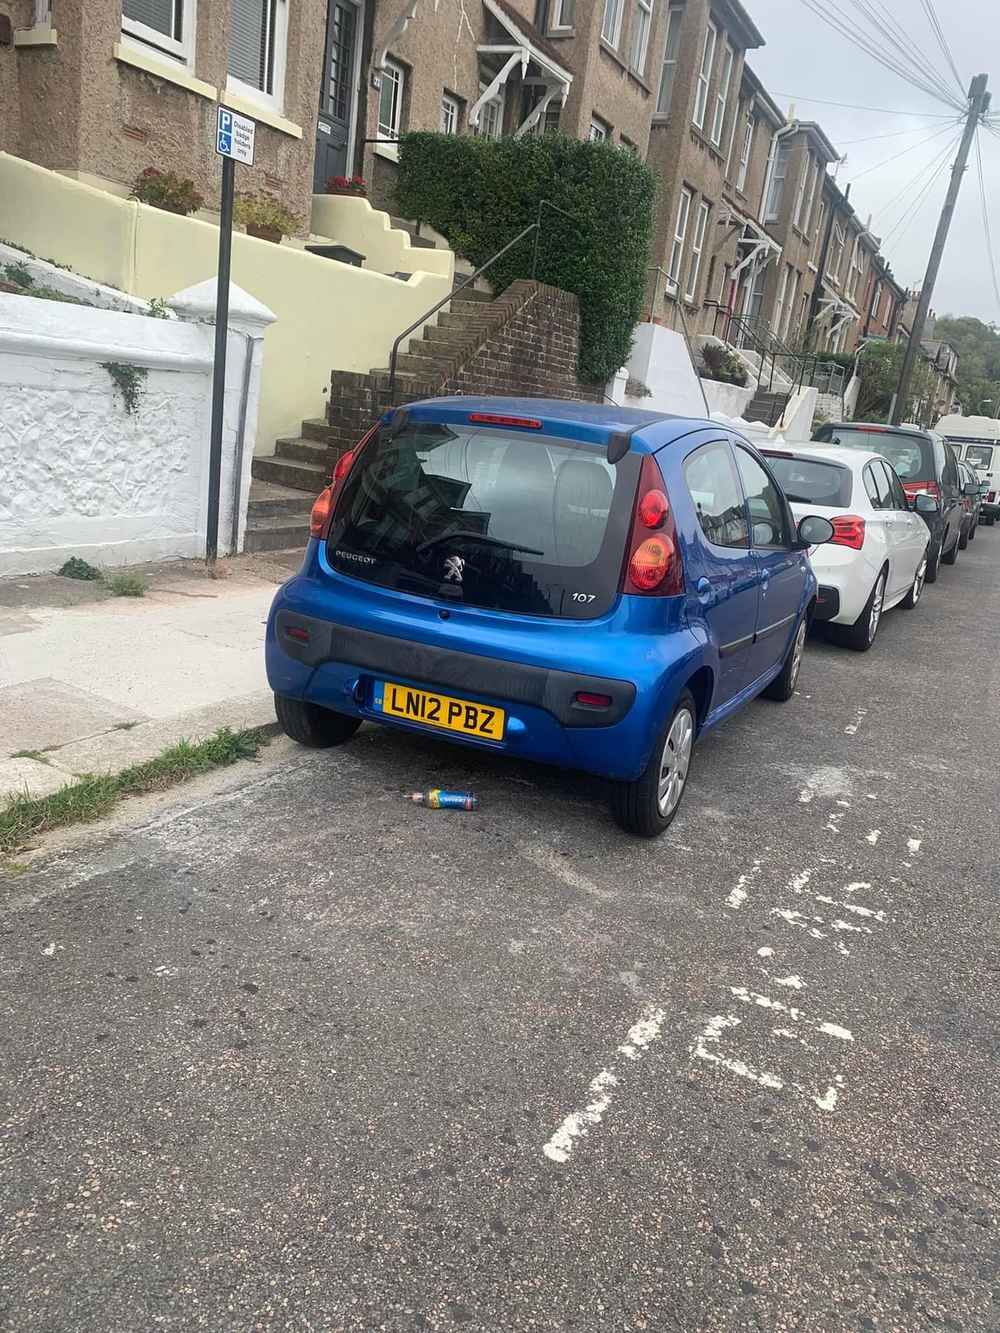 Photograph of LN12 PBZ - a Blue Peugeot 107 parked in Hollingdean by a non-resident. The fourth of six photographs supplied by the residents of Hollingdean.